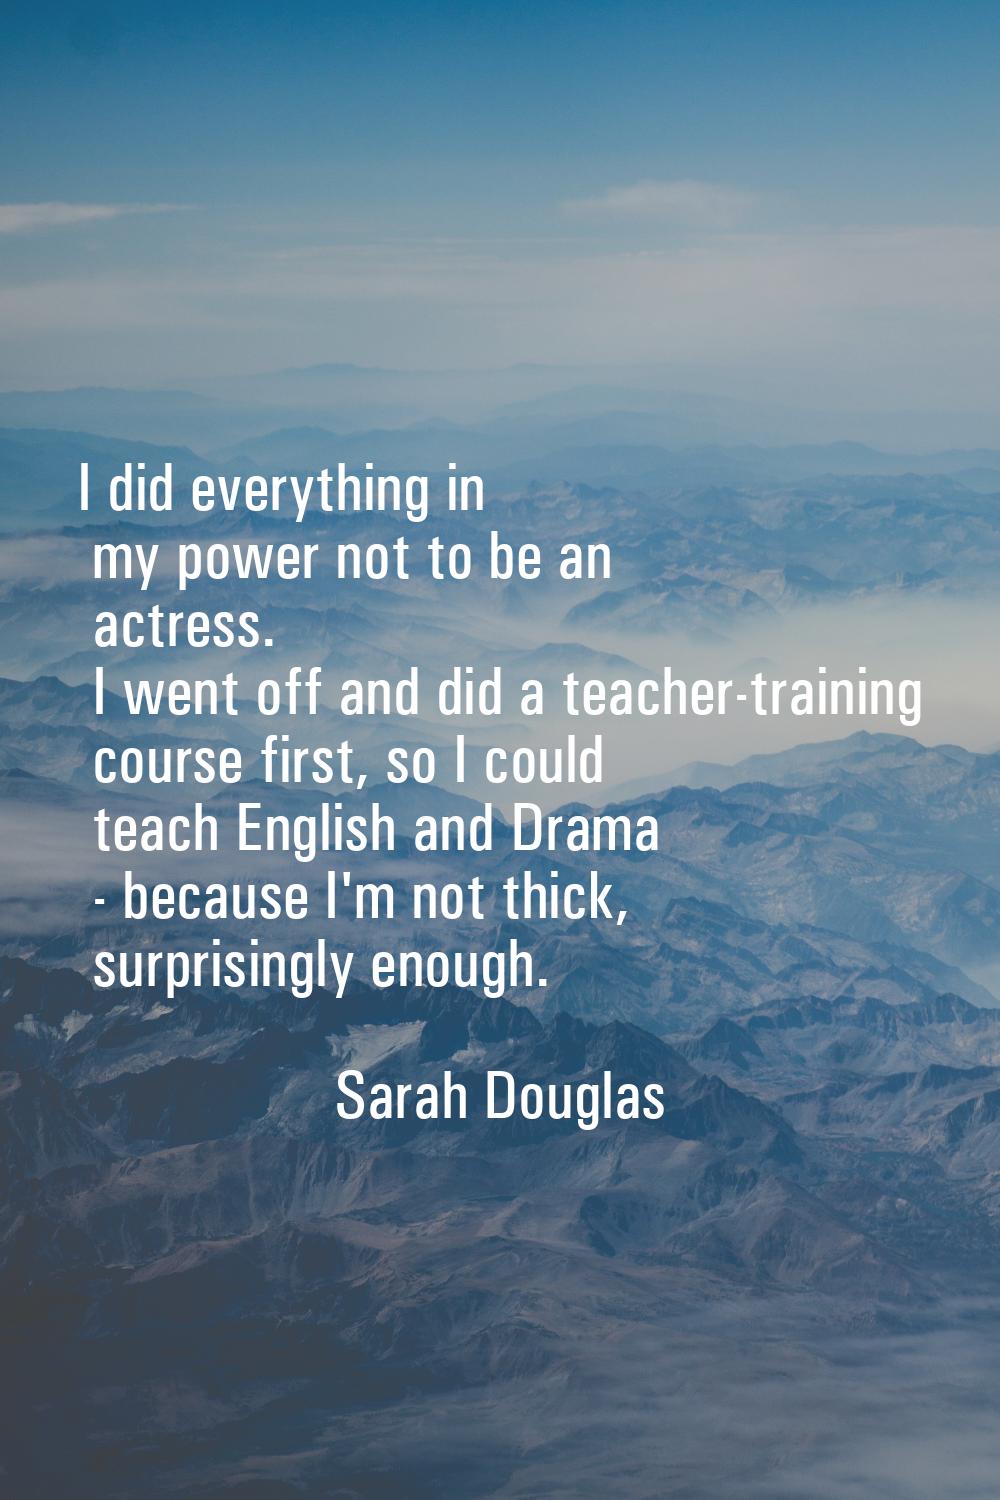 I did everything in my power not to be an actress. I went off and did a teacher-training course fir